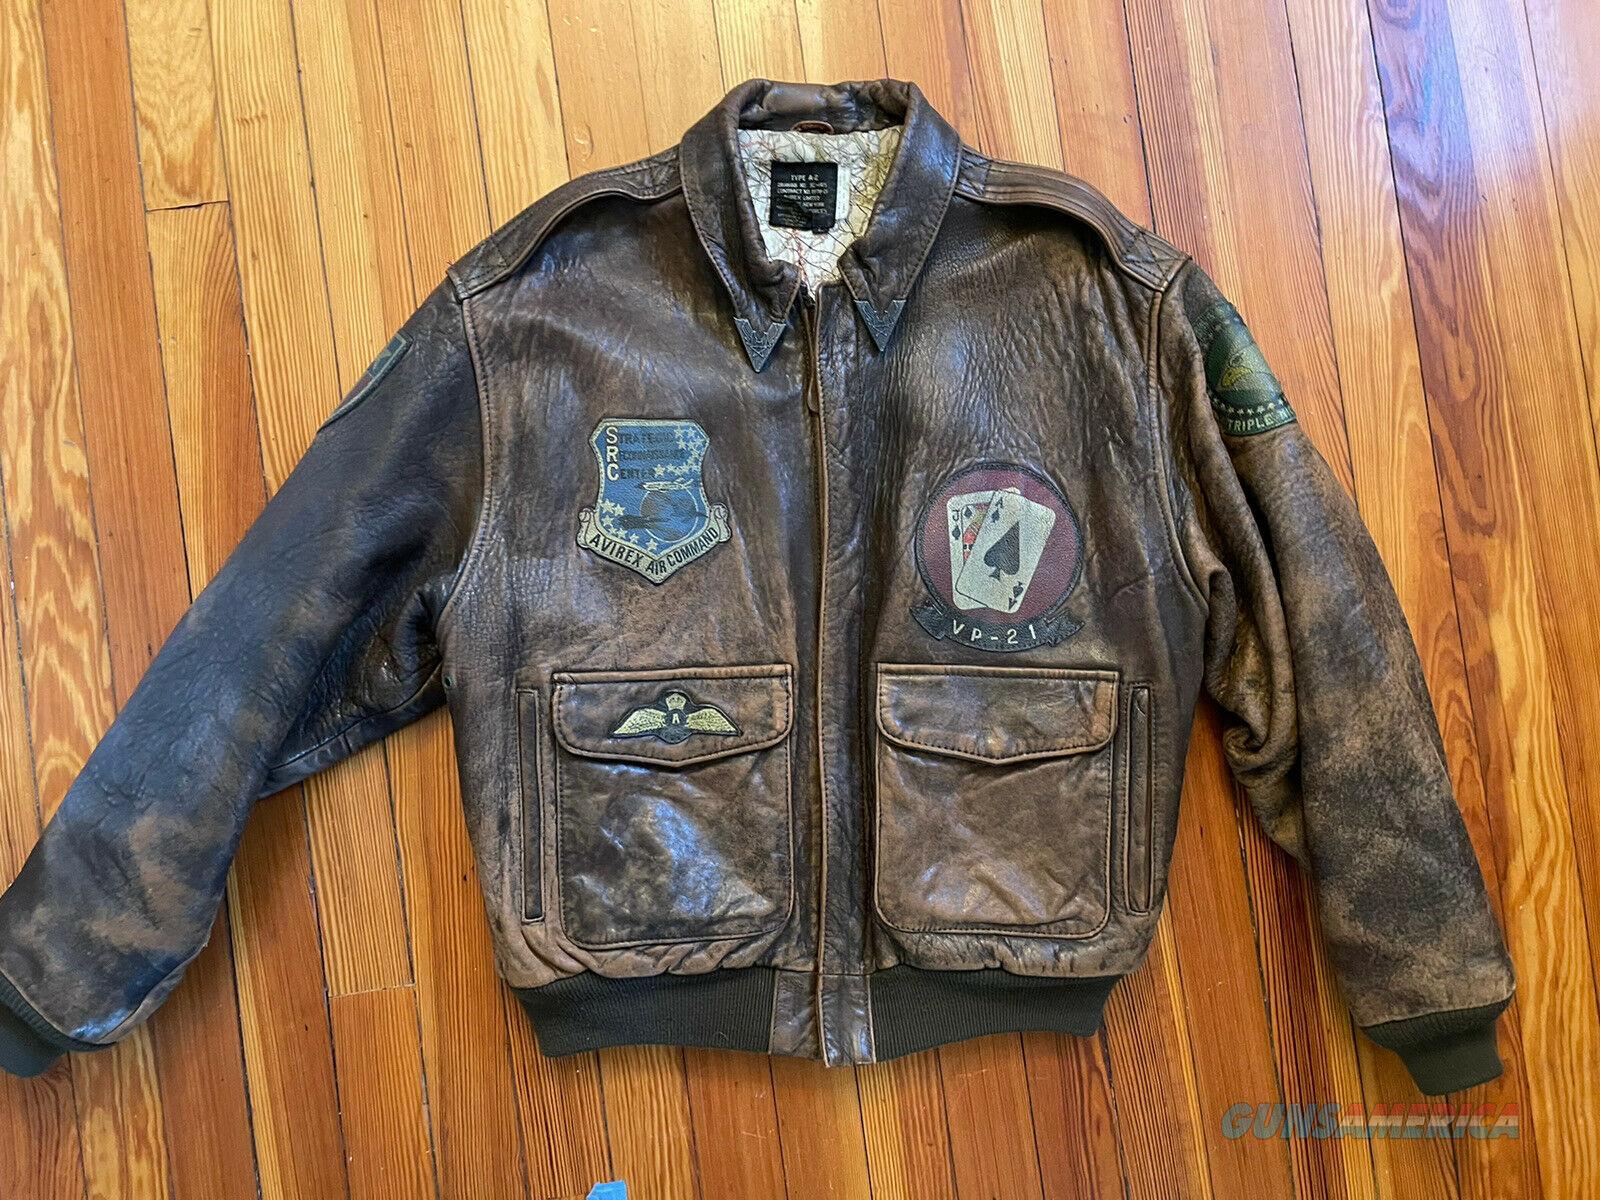 Avirex A-2 Leather Jacket Air Comma... for sale at Gunsamerica.com ...